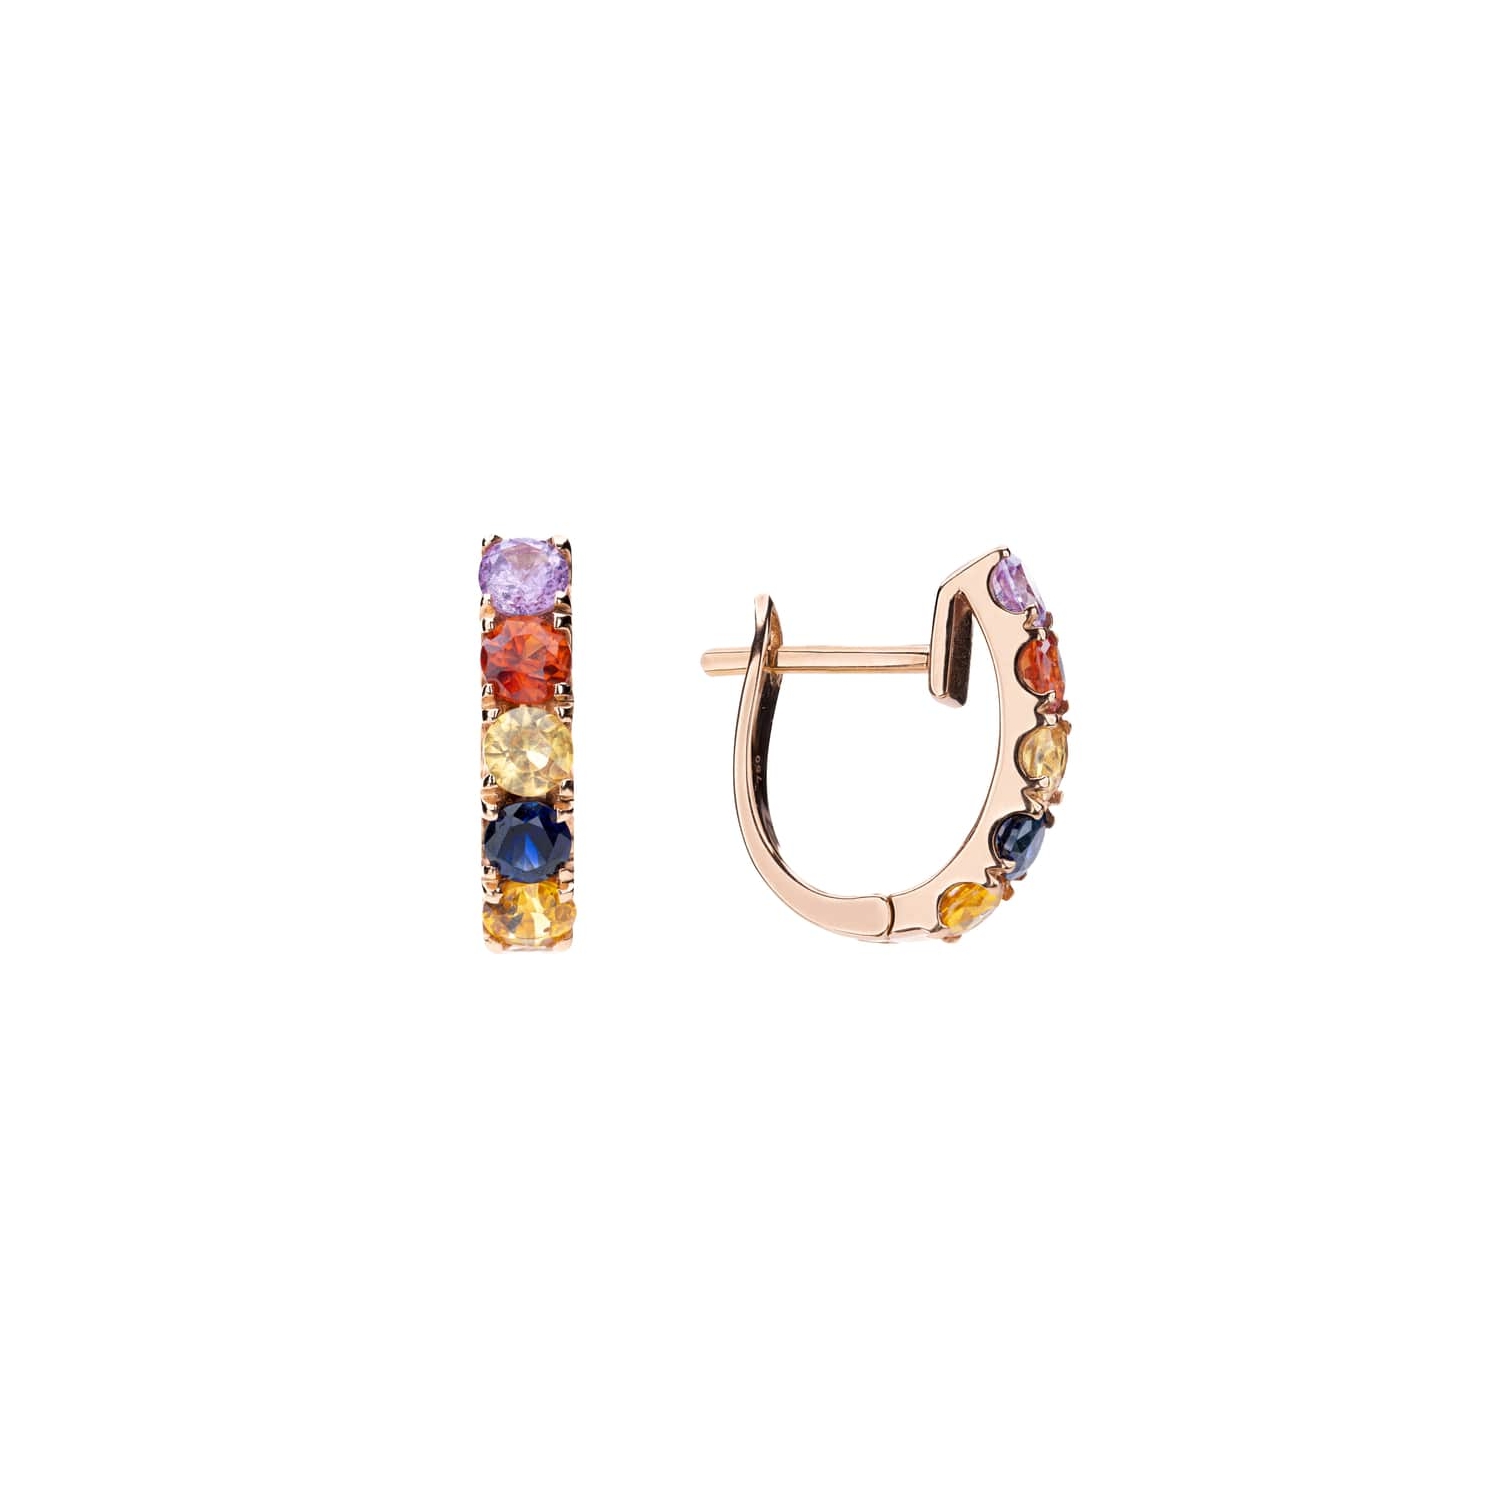 Gold earrings with gemstones "Colors 124"